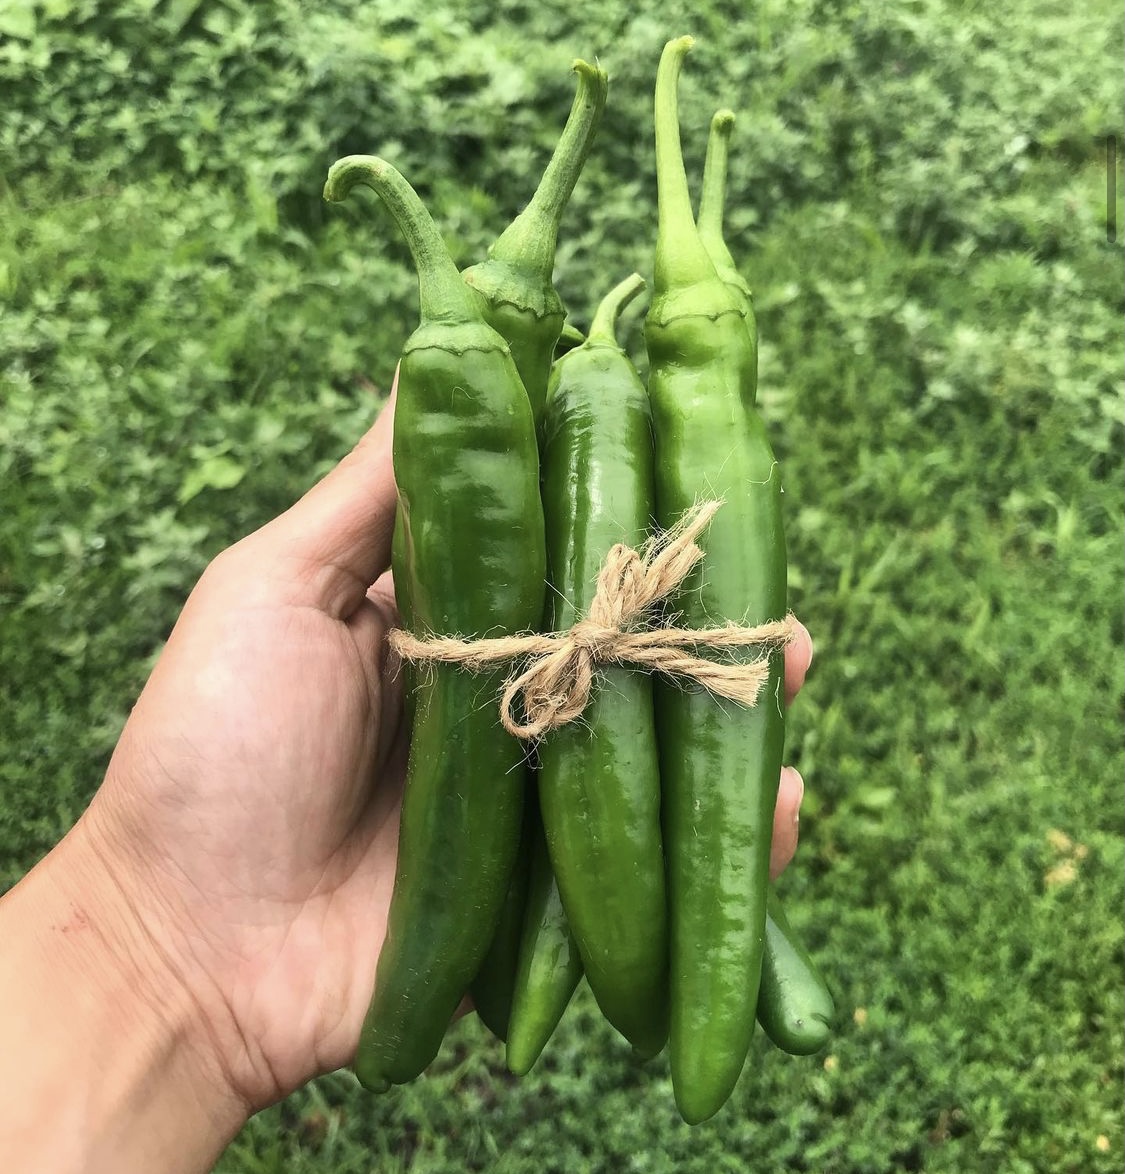 Several firm green long peppers are bundled with a twine string tied in a bow. Photo from Humbleweed Farm's Instagram page.